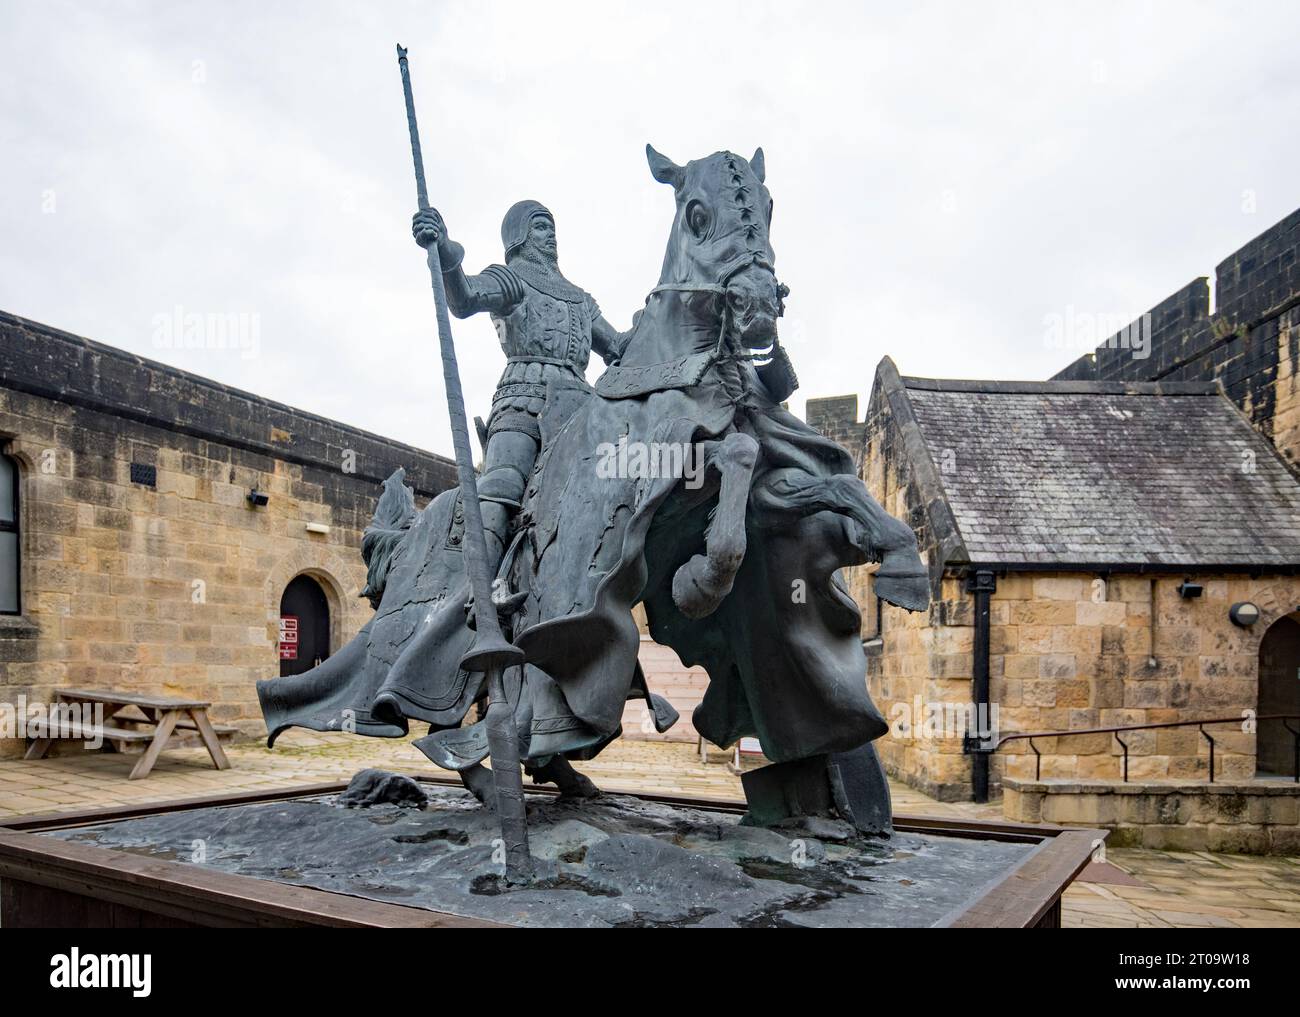 Alnwick Castle Northumberland 11th Century substantially intact castle in the county of Northumberland,UK.Statue of Harry Hotspur,Courtyard, Alnwick. Stock Photo